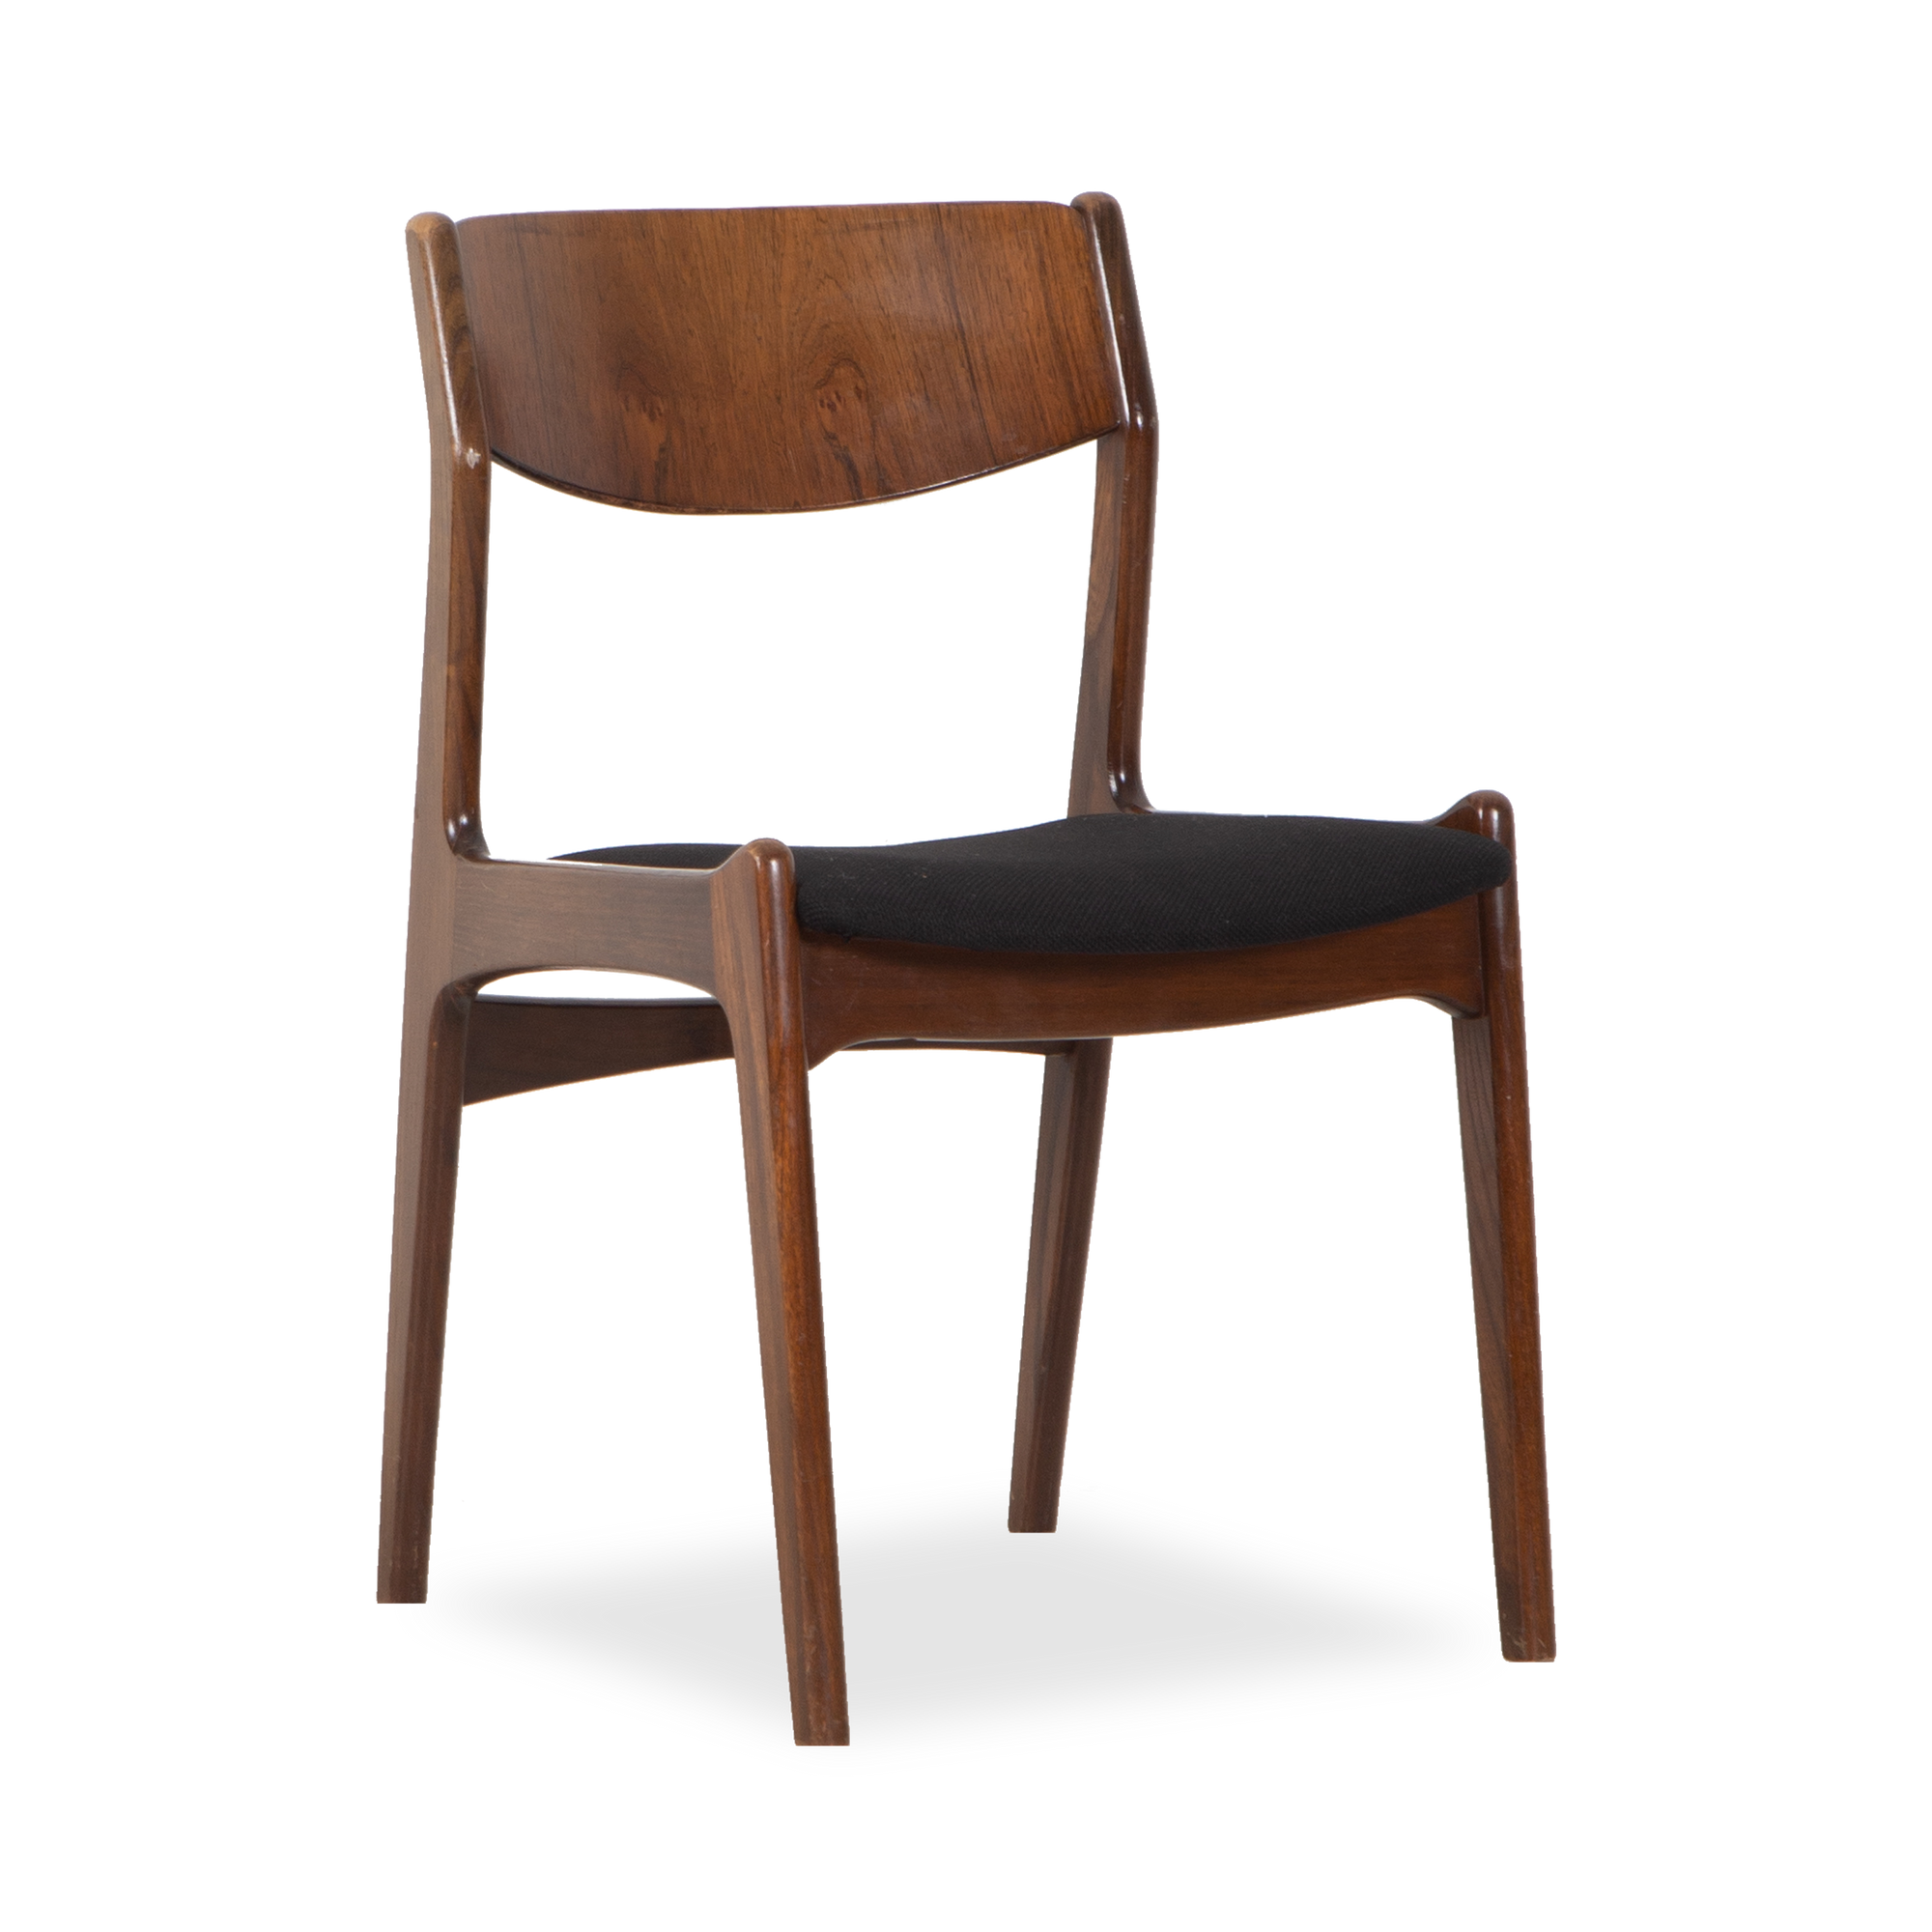 A great example of Scandinavian design and carpentry of the mid-century, this vintage chair was manufactured in Denmark, circa 1960s.